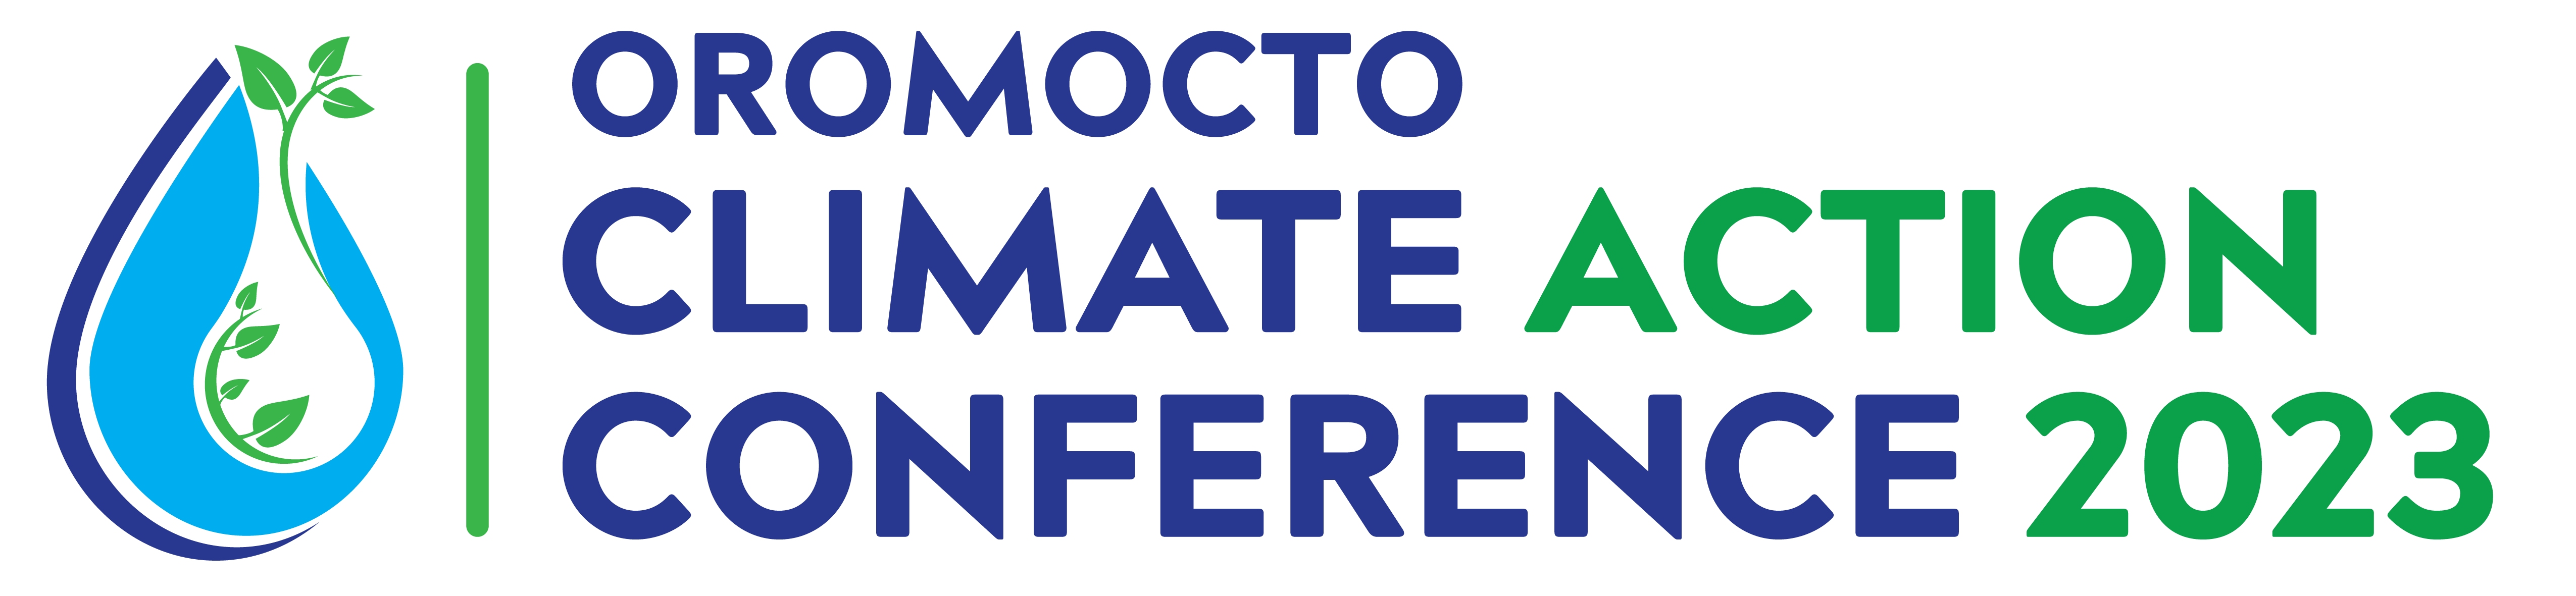 Oromocto Climate Action Conference 2023 logo